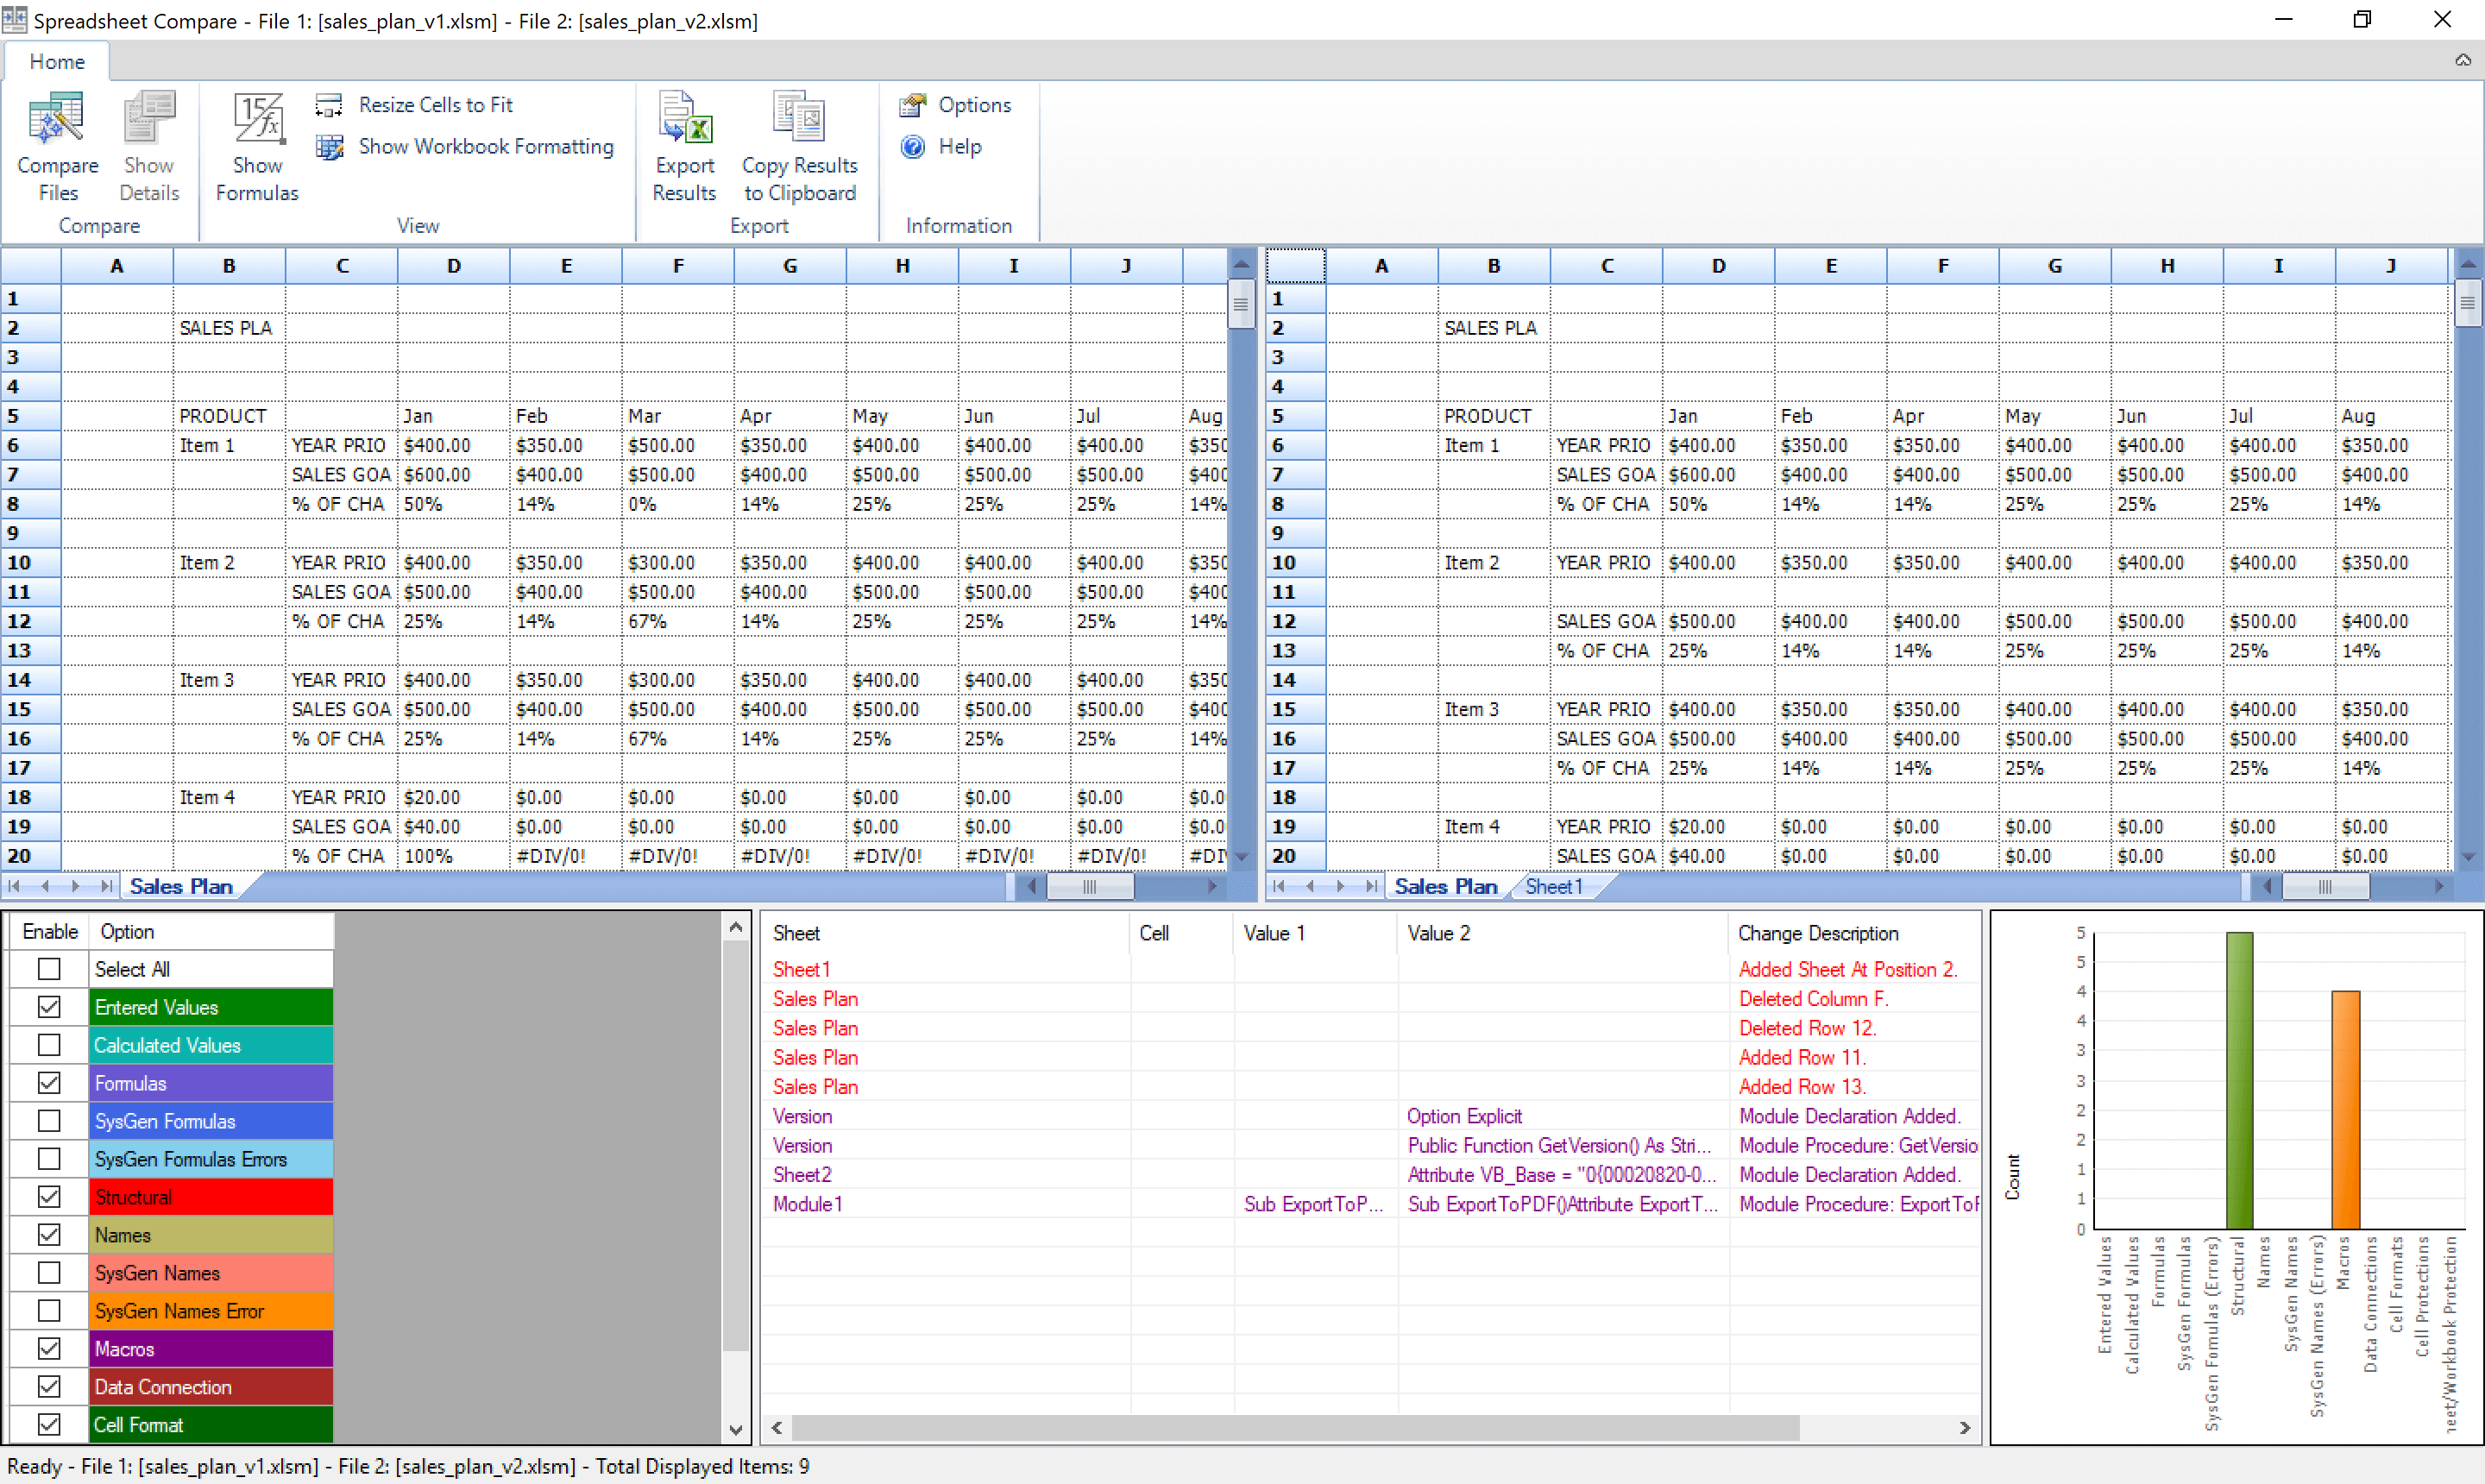 The Best Excel Compare Tools For Office 365 Cost Comparison Worksheet